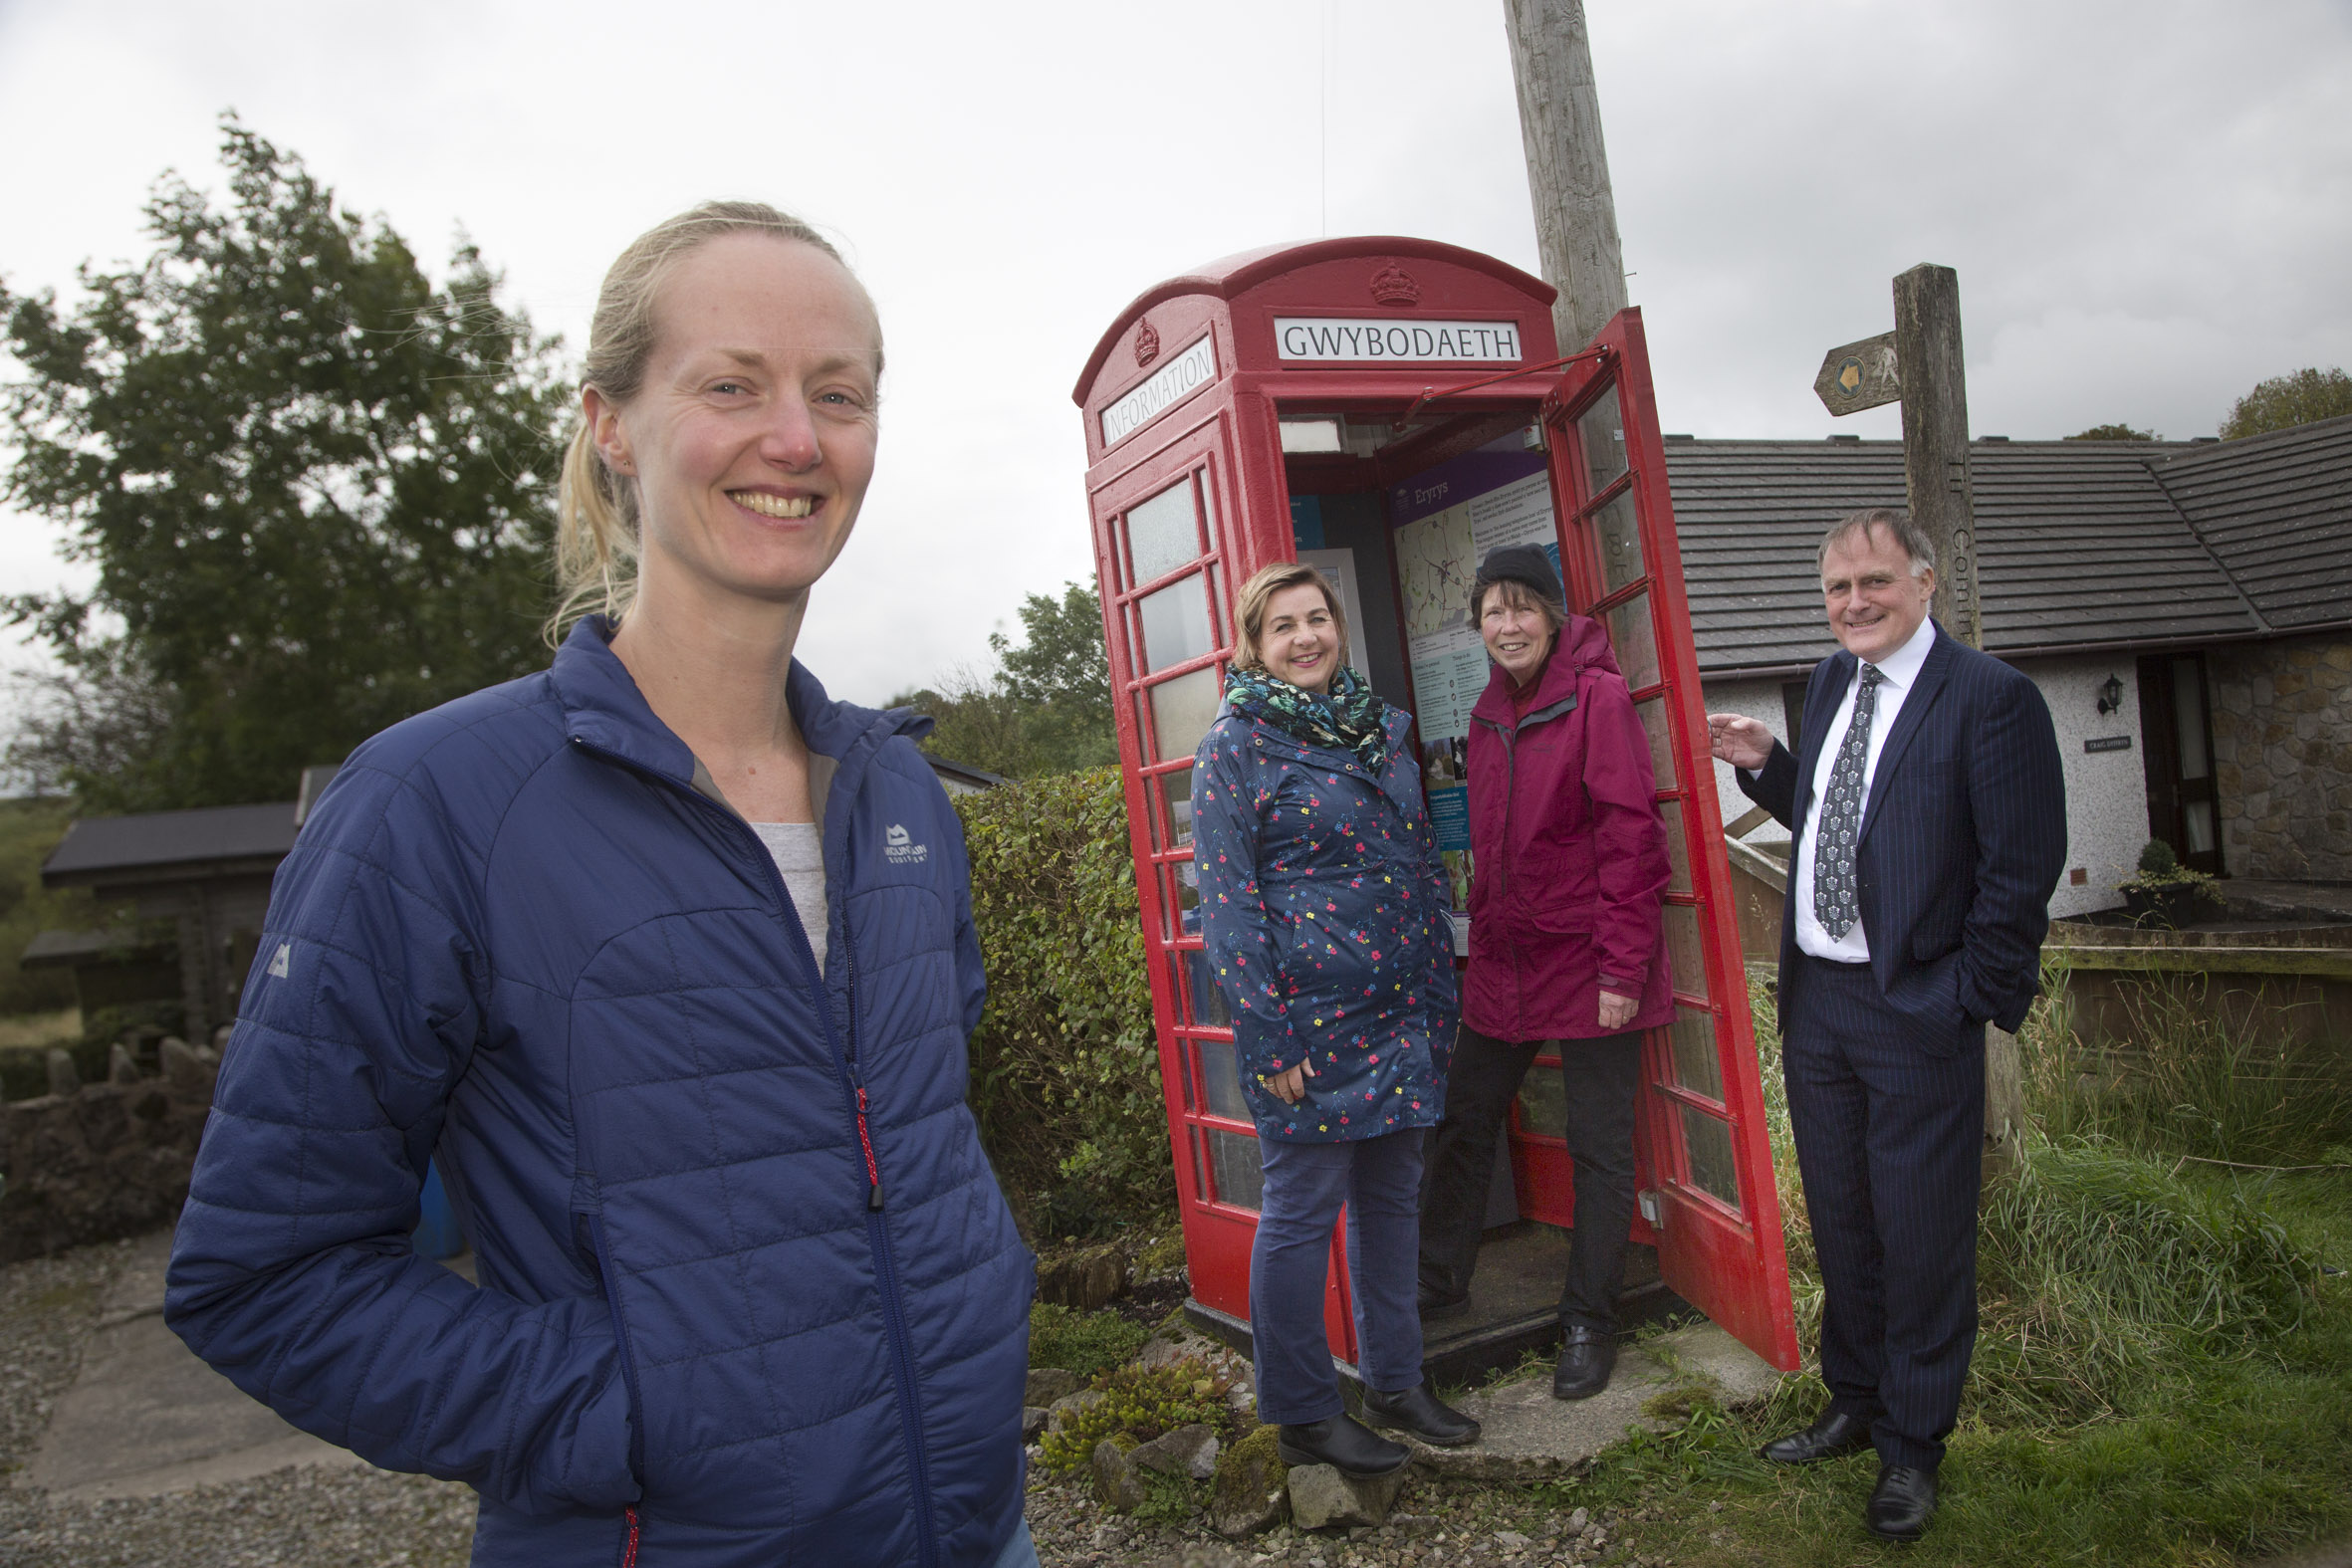 Much-loved village telephone boxes find new lease of life in the countryside